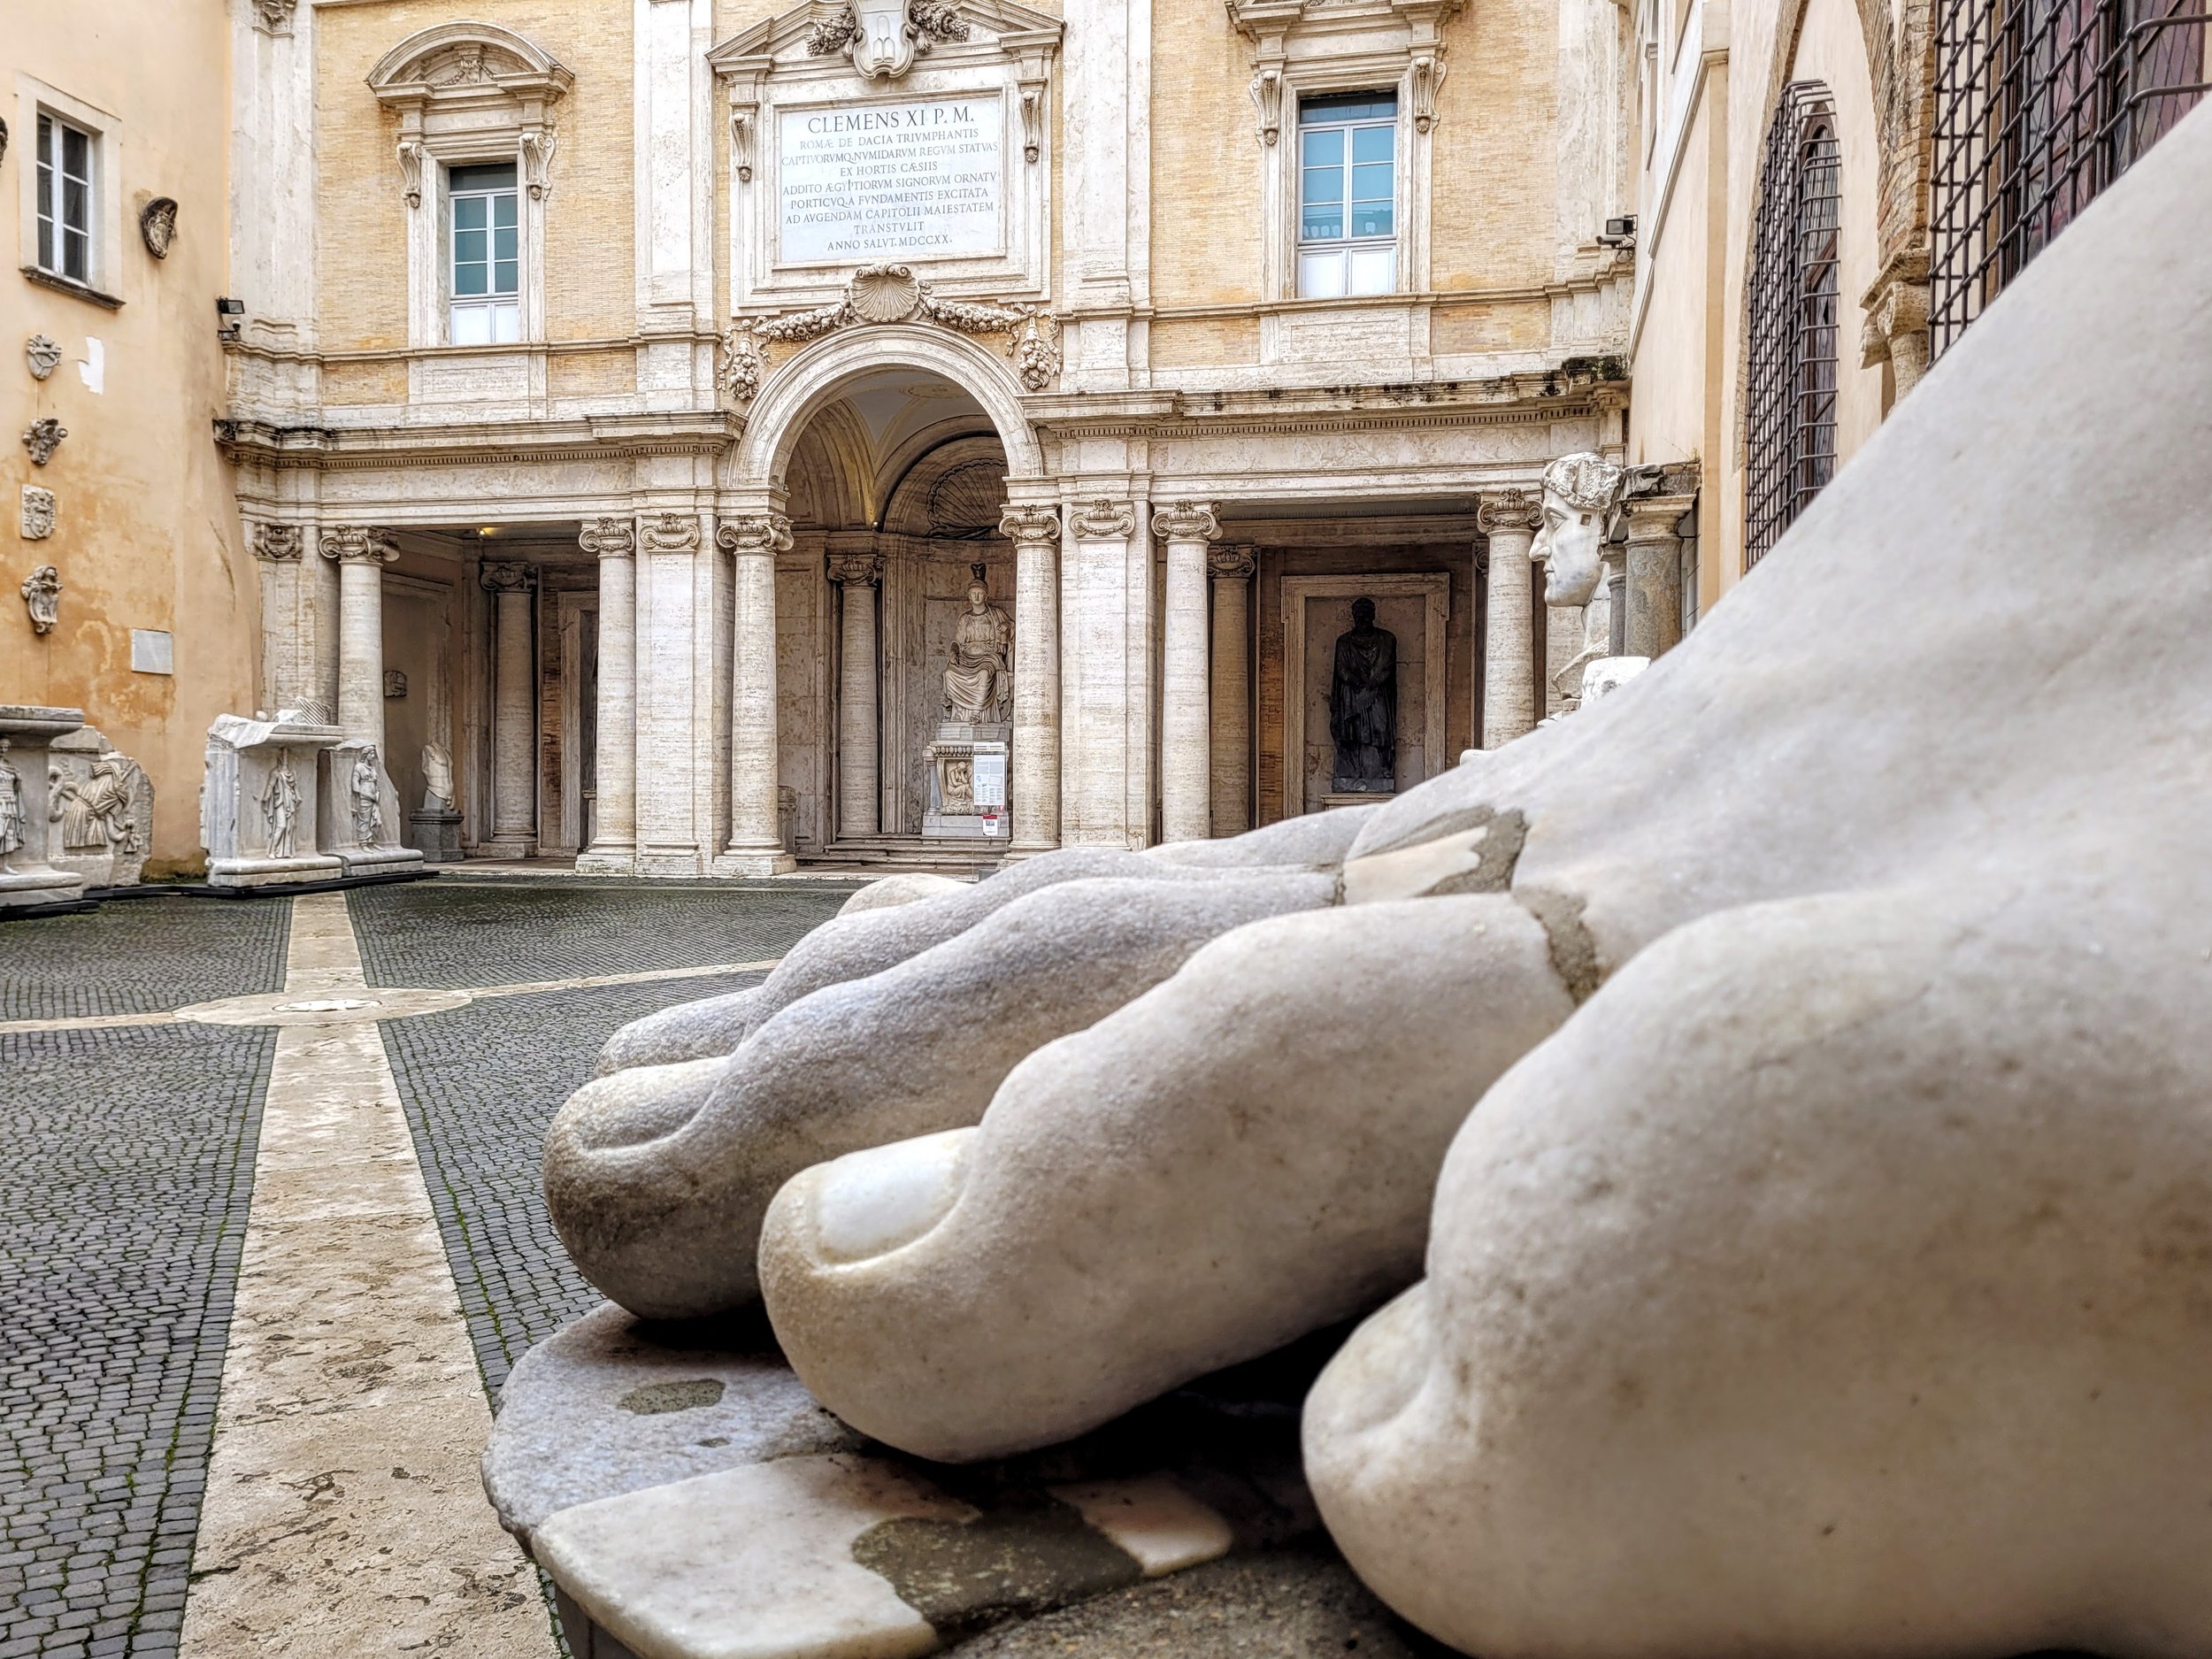 7 Hills of Rome - Capitoline Museums